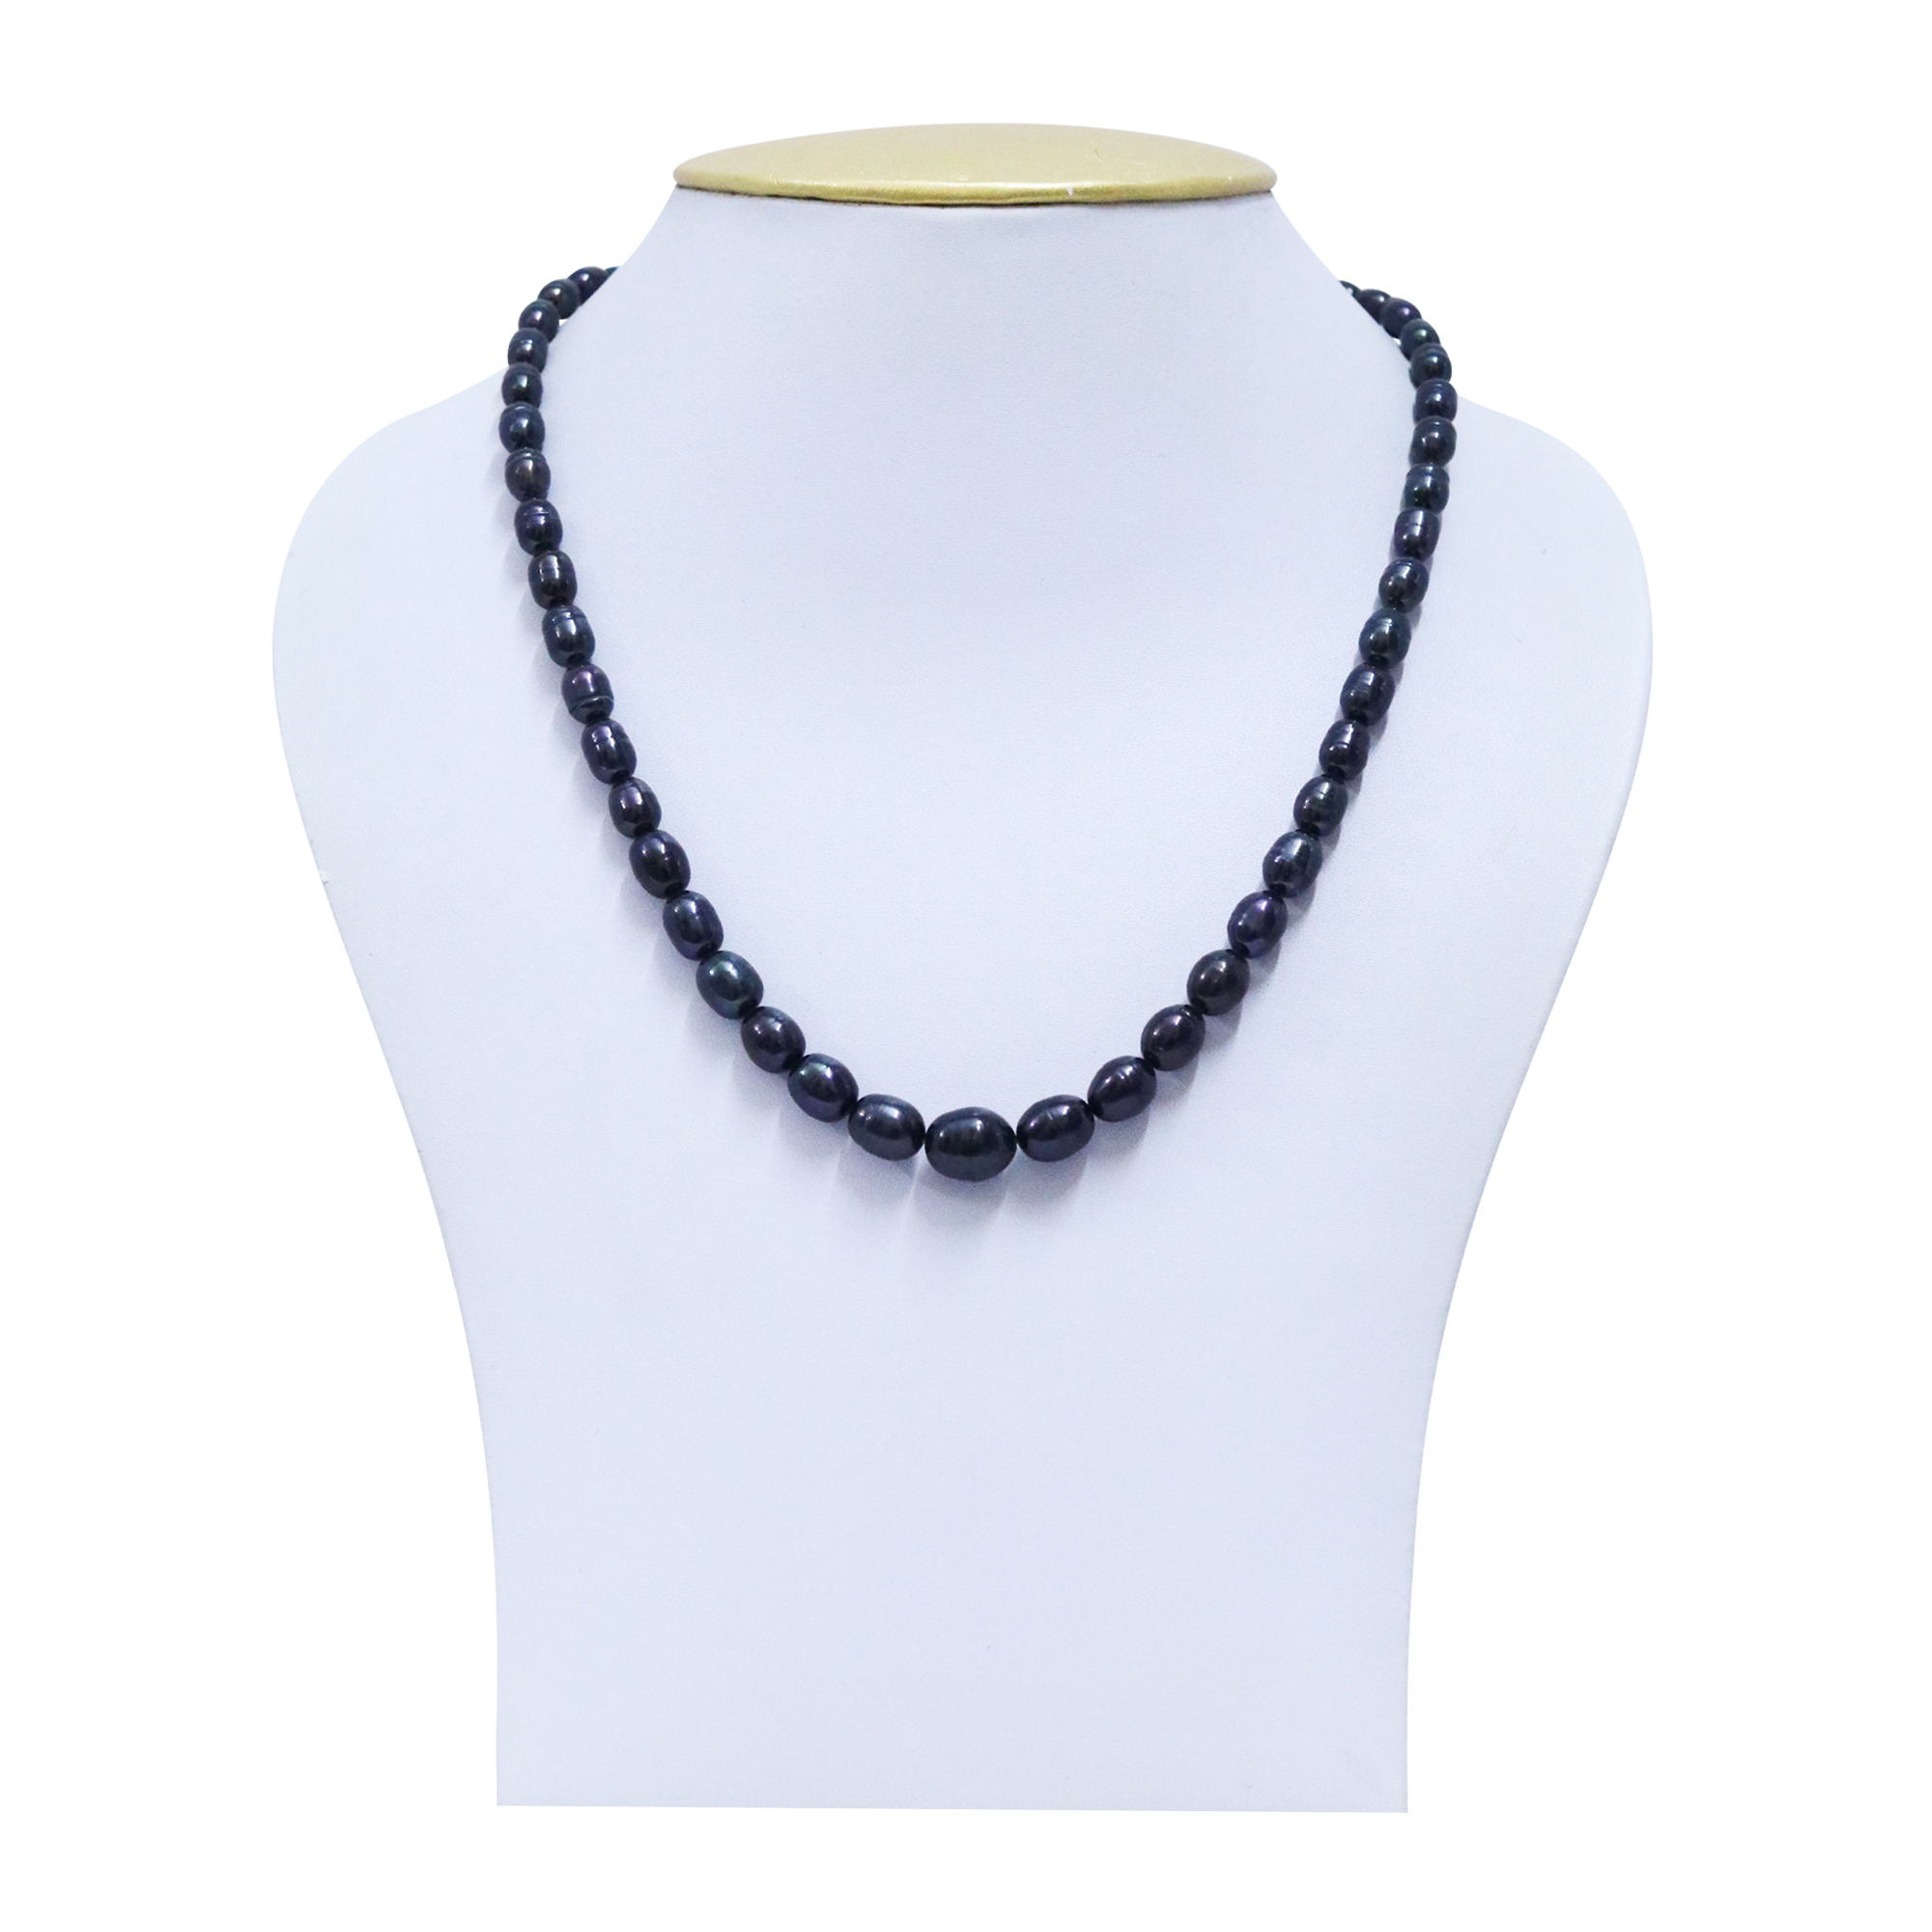 Floating Black Pearl Necklace | Purity Pearls